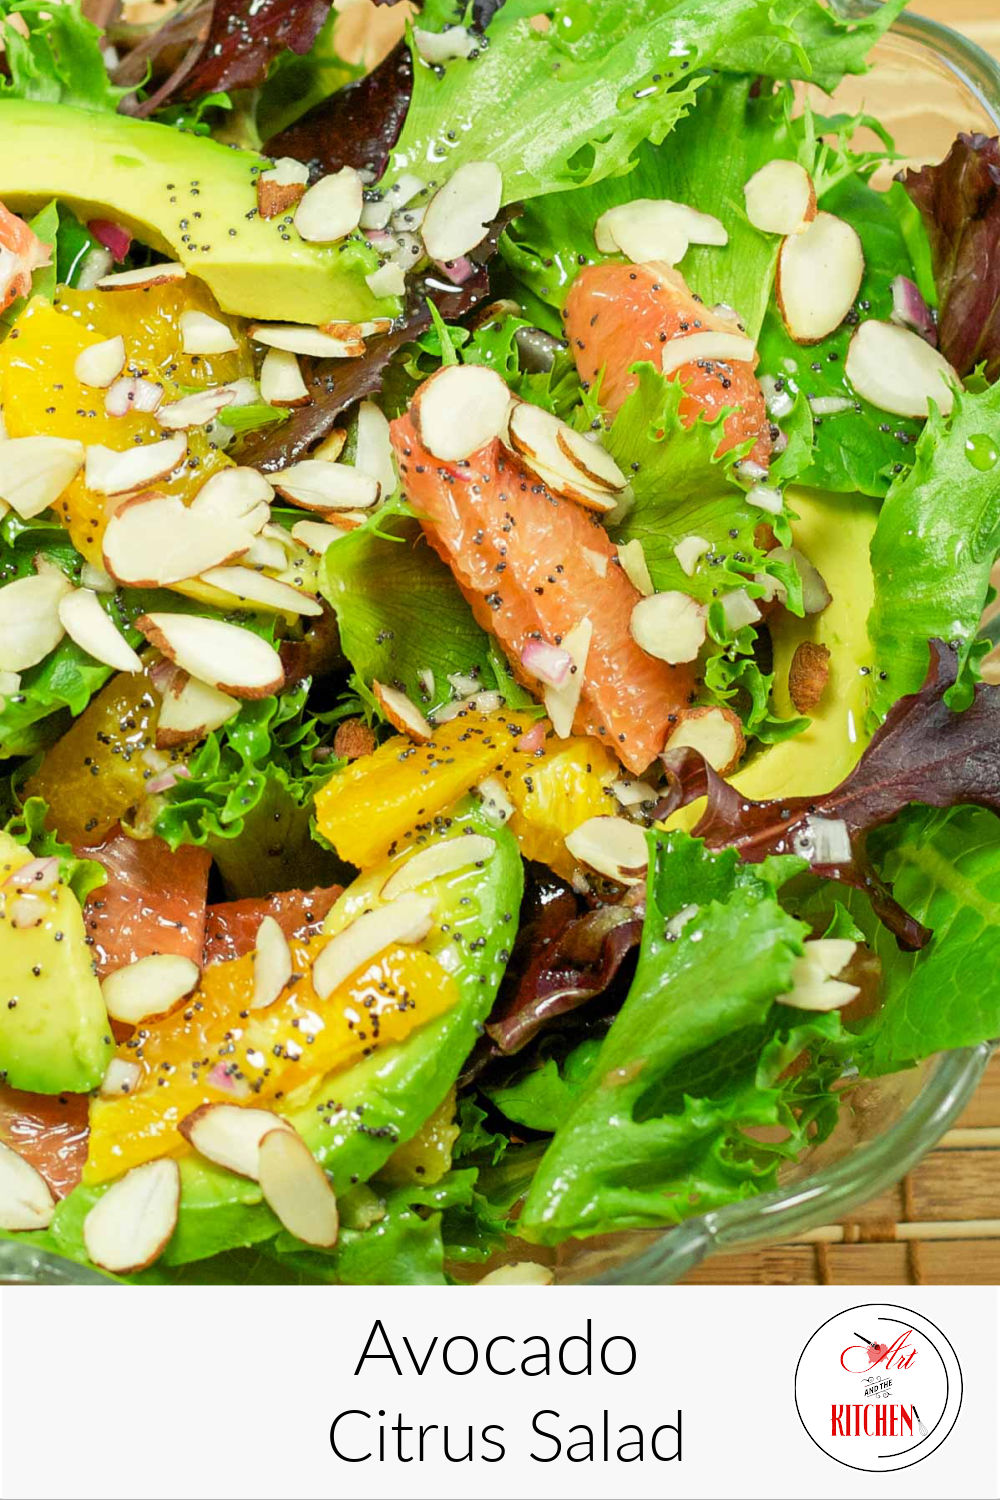 Avocado Citrus Salad is a light, refreshing salad with creamy avocado, tangy grapefruit and oranges tossed in a homemade poppy seed dressing. via @artandthekitch